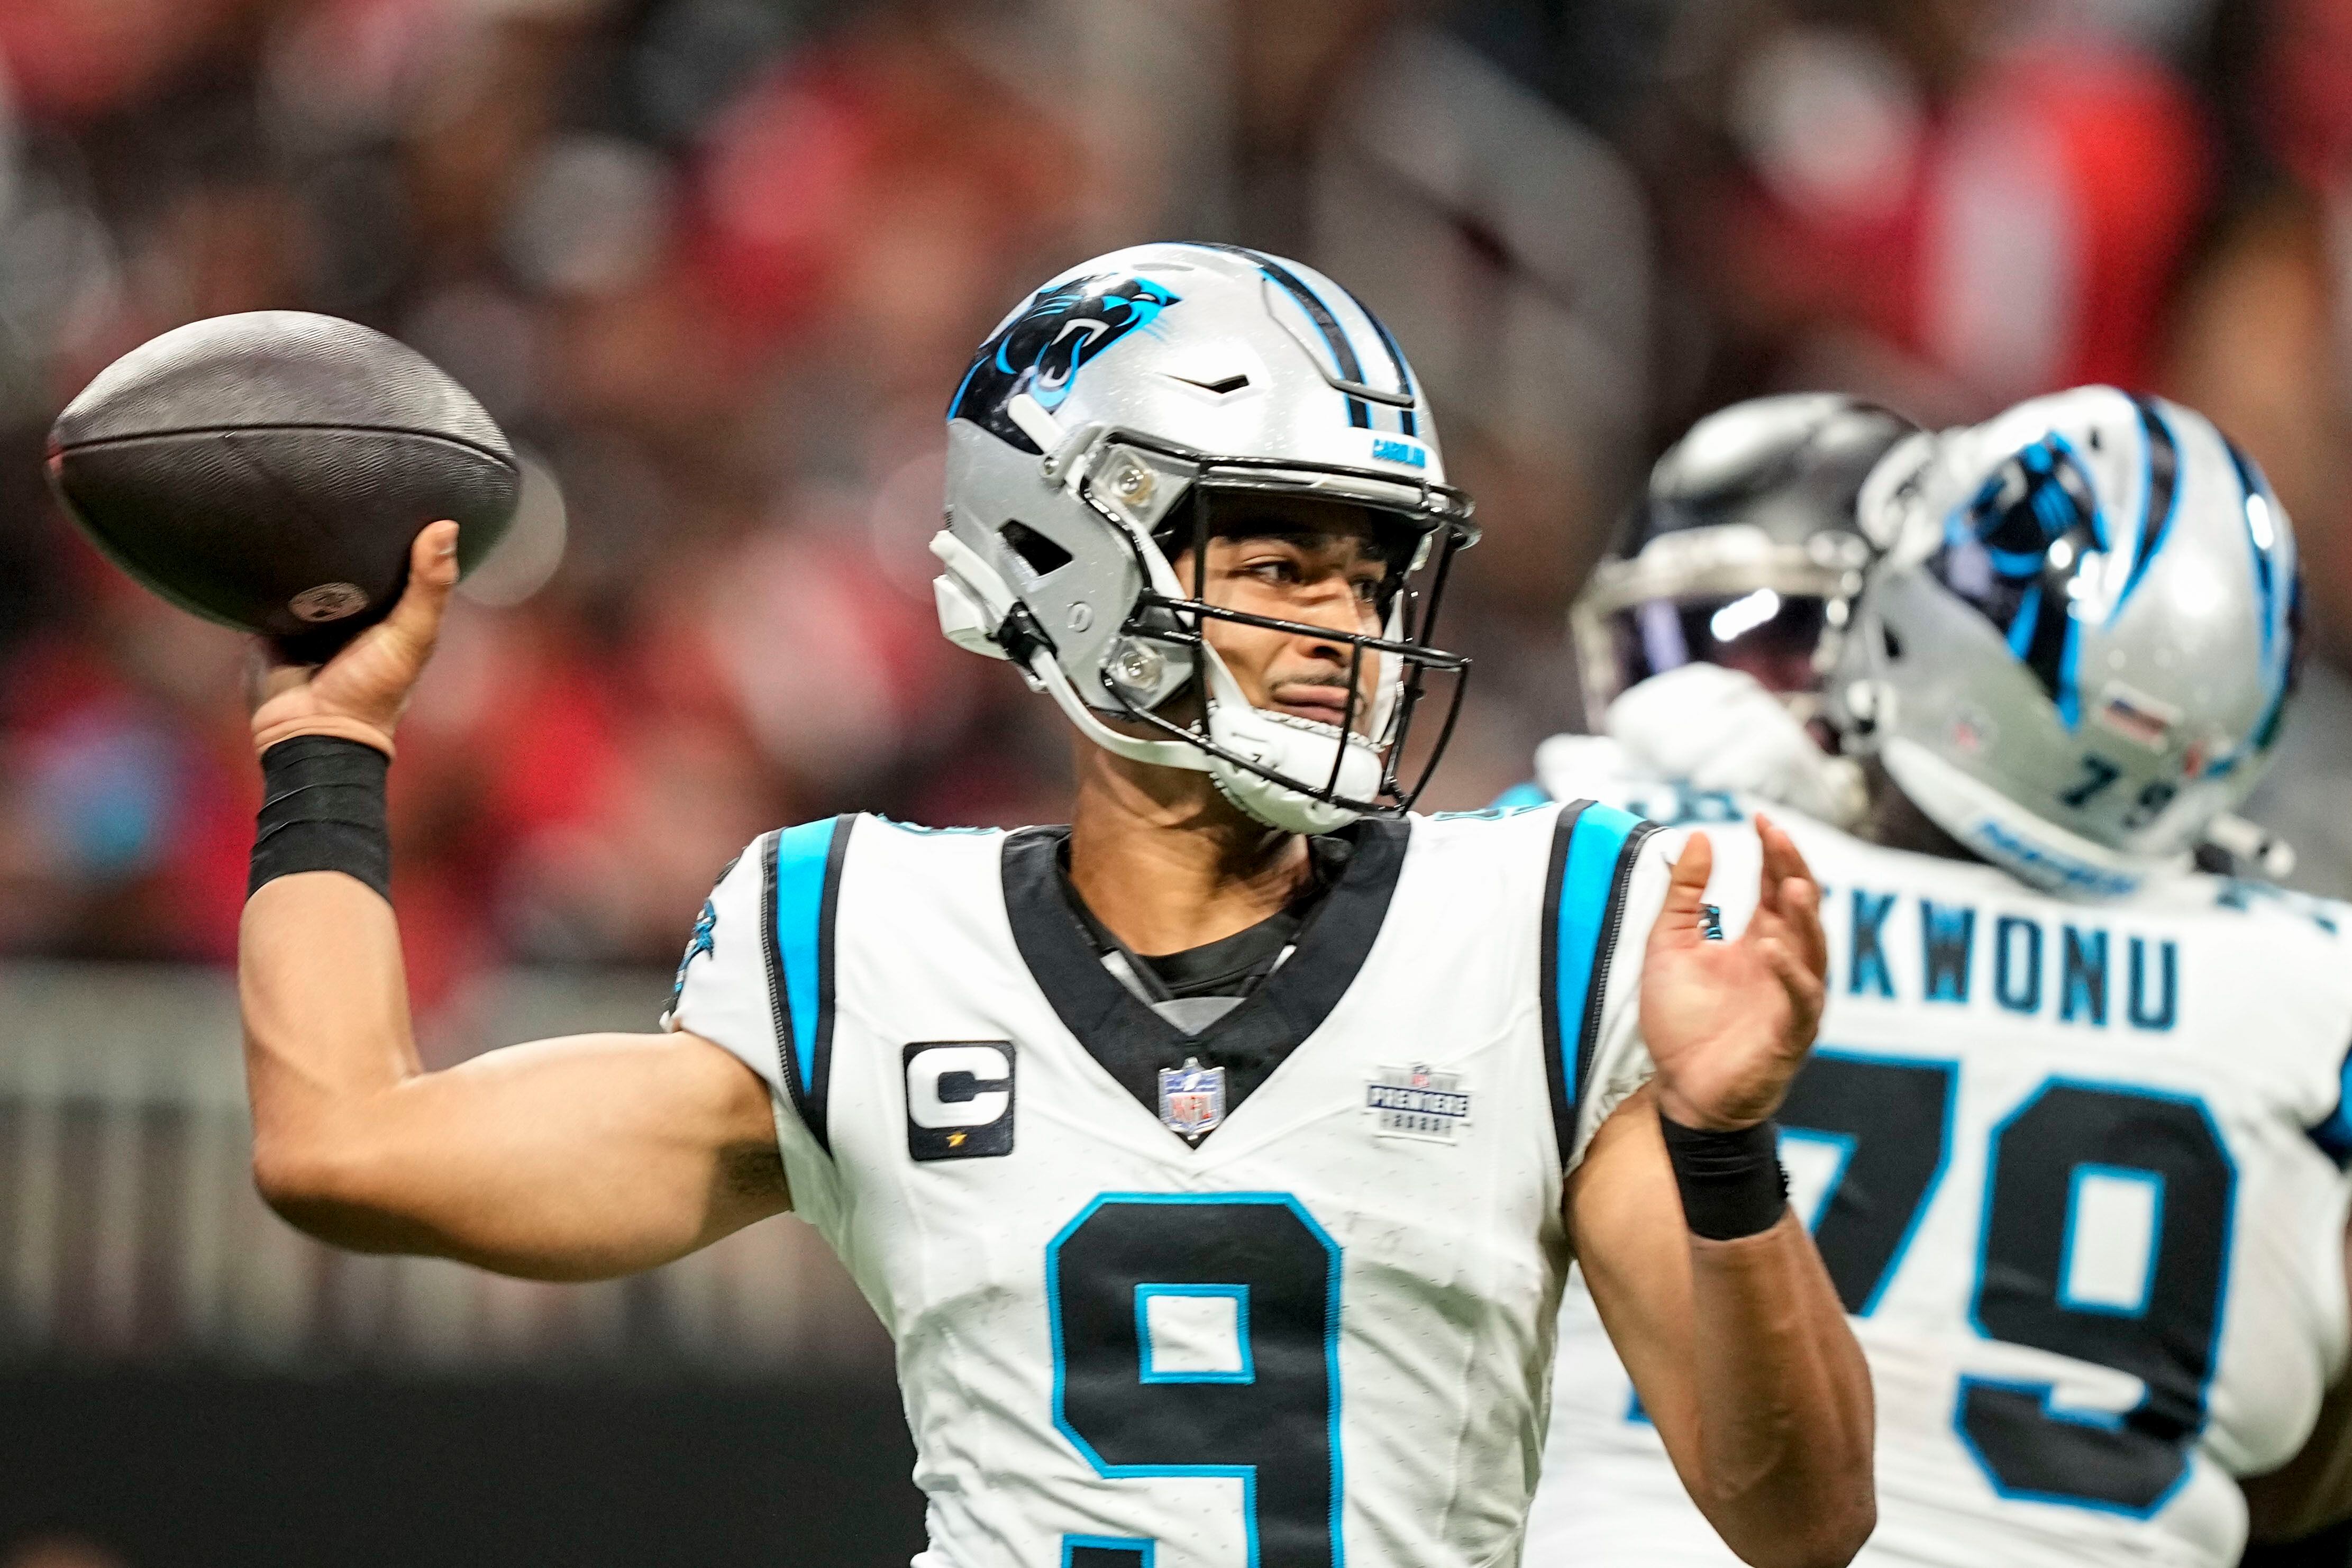 Panthers' Bryce Young limited to 21 yards in preseason debut as